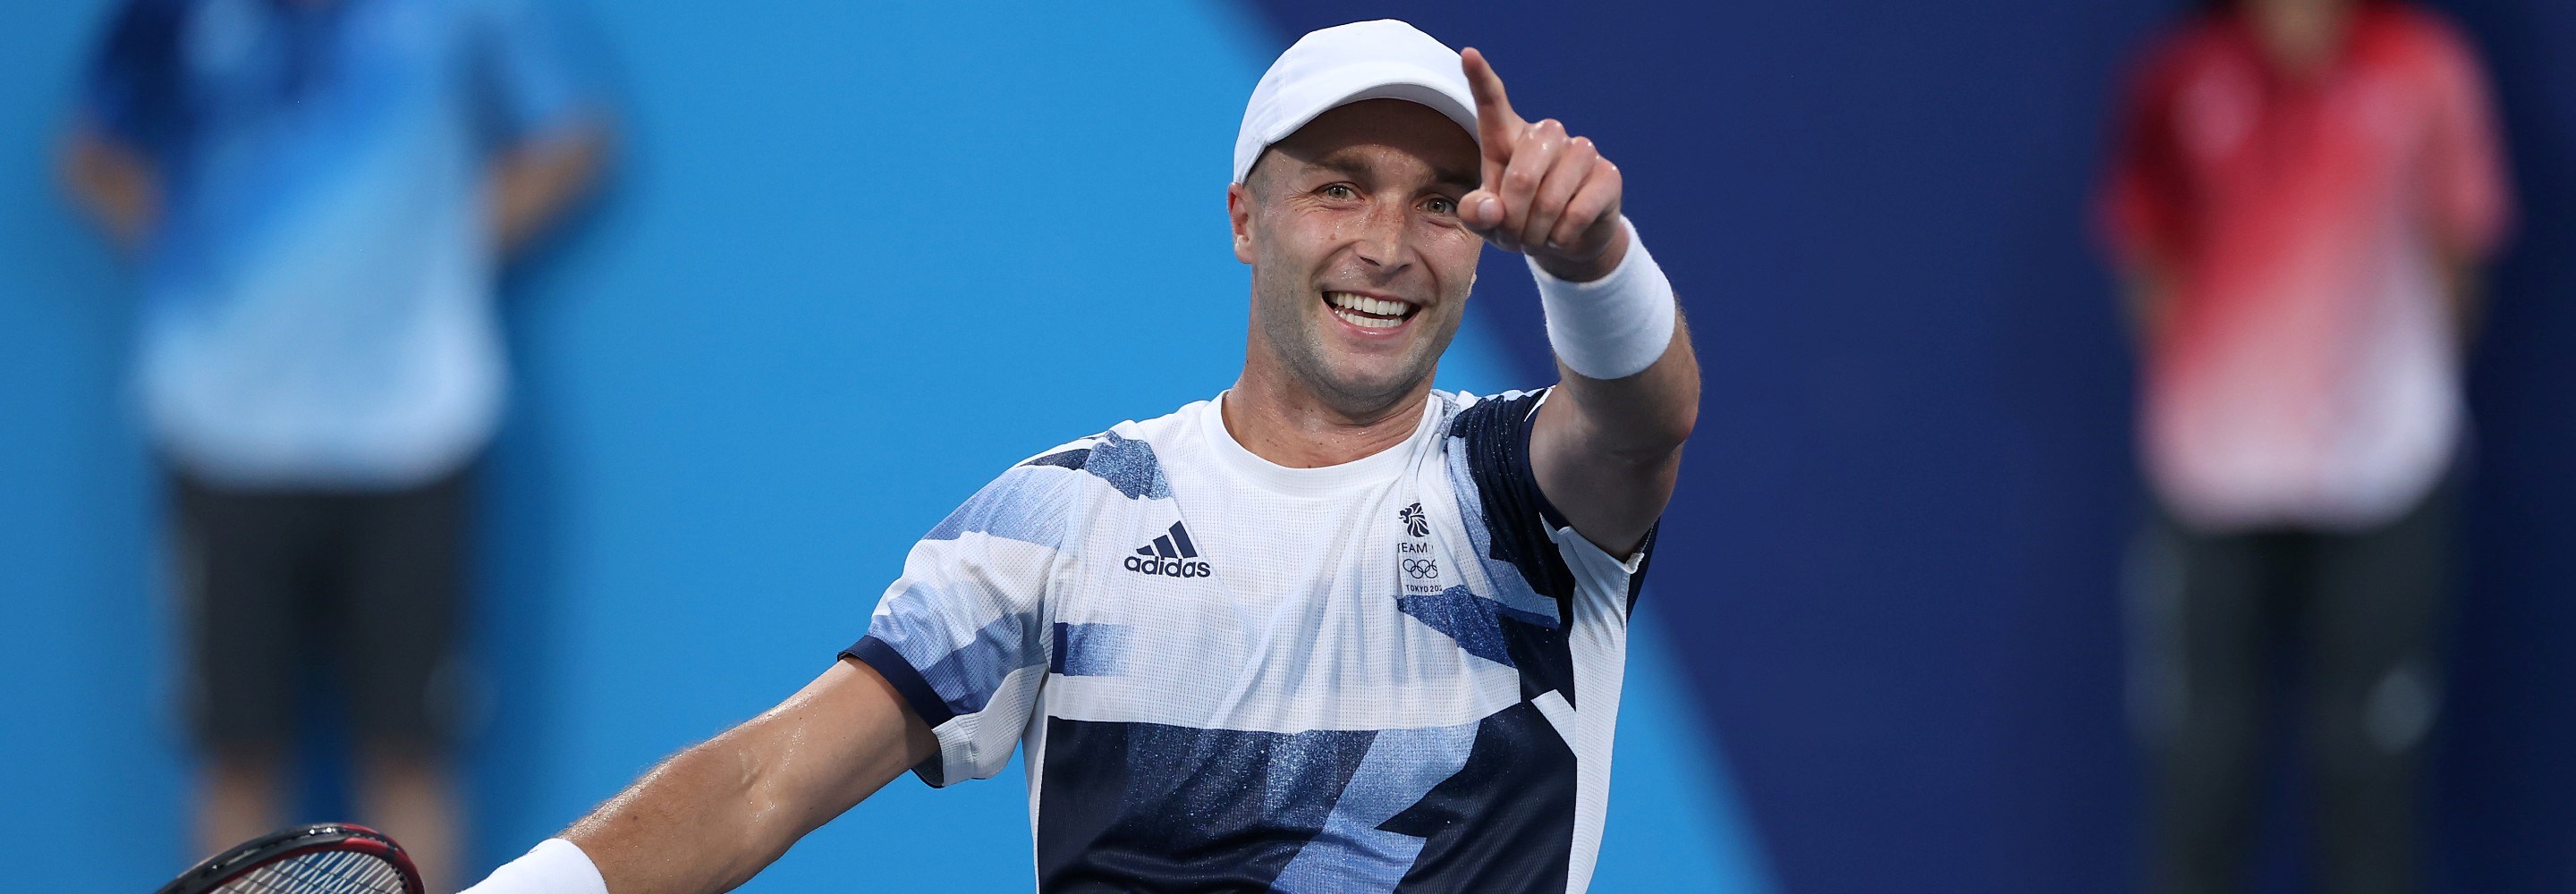 Liam Broady of Team Great Britain celebrates after match point